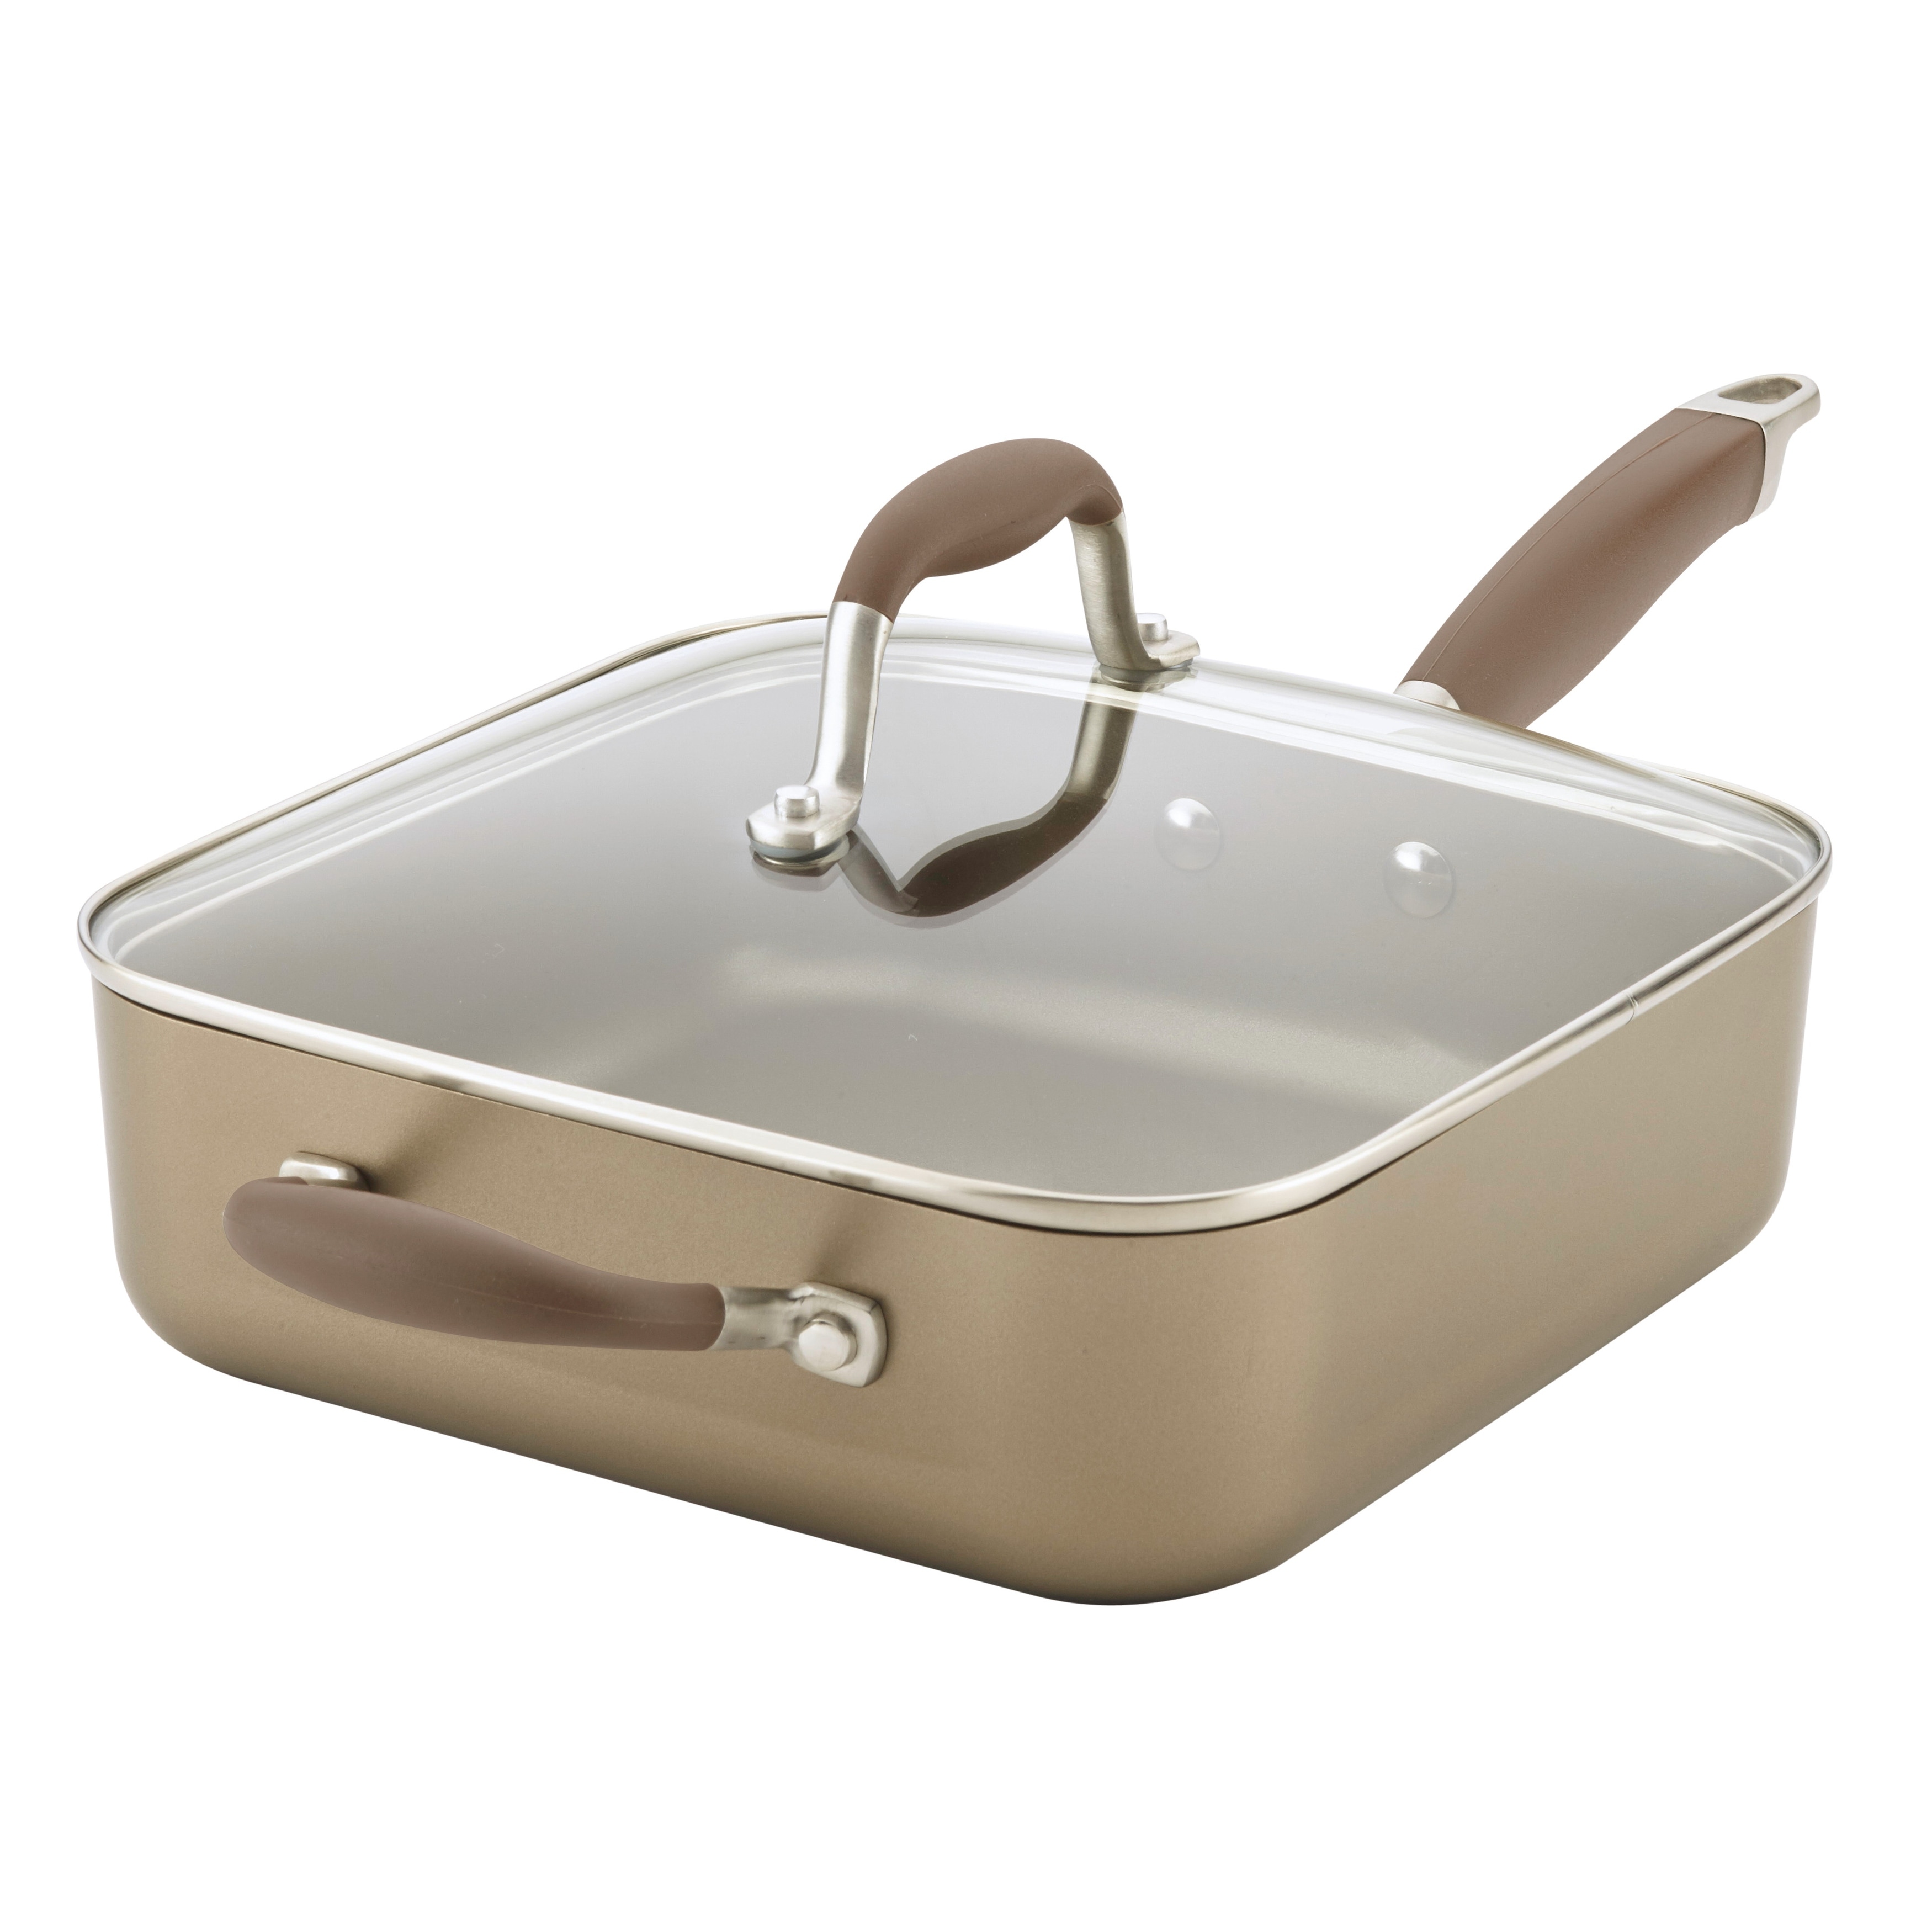 All-Clad Essentials Nonstick Hard Anodized Square Pan | 13